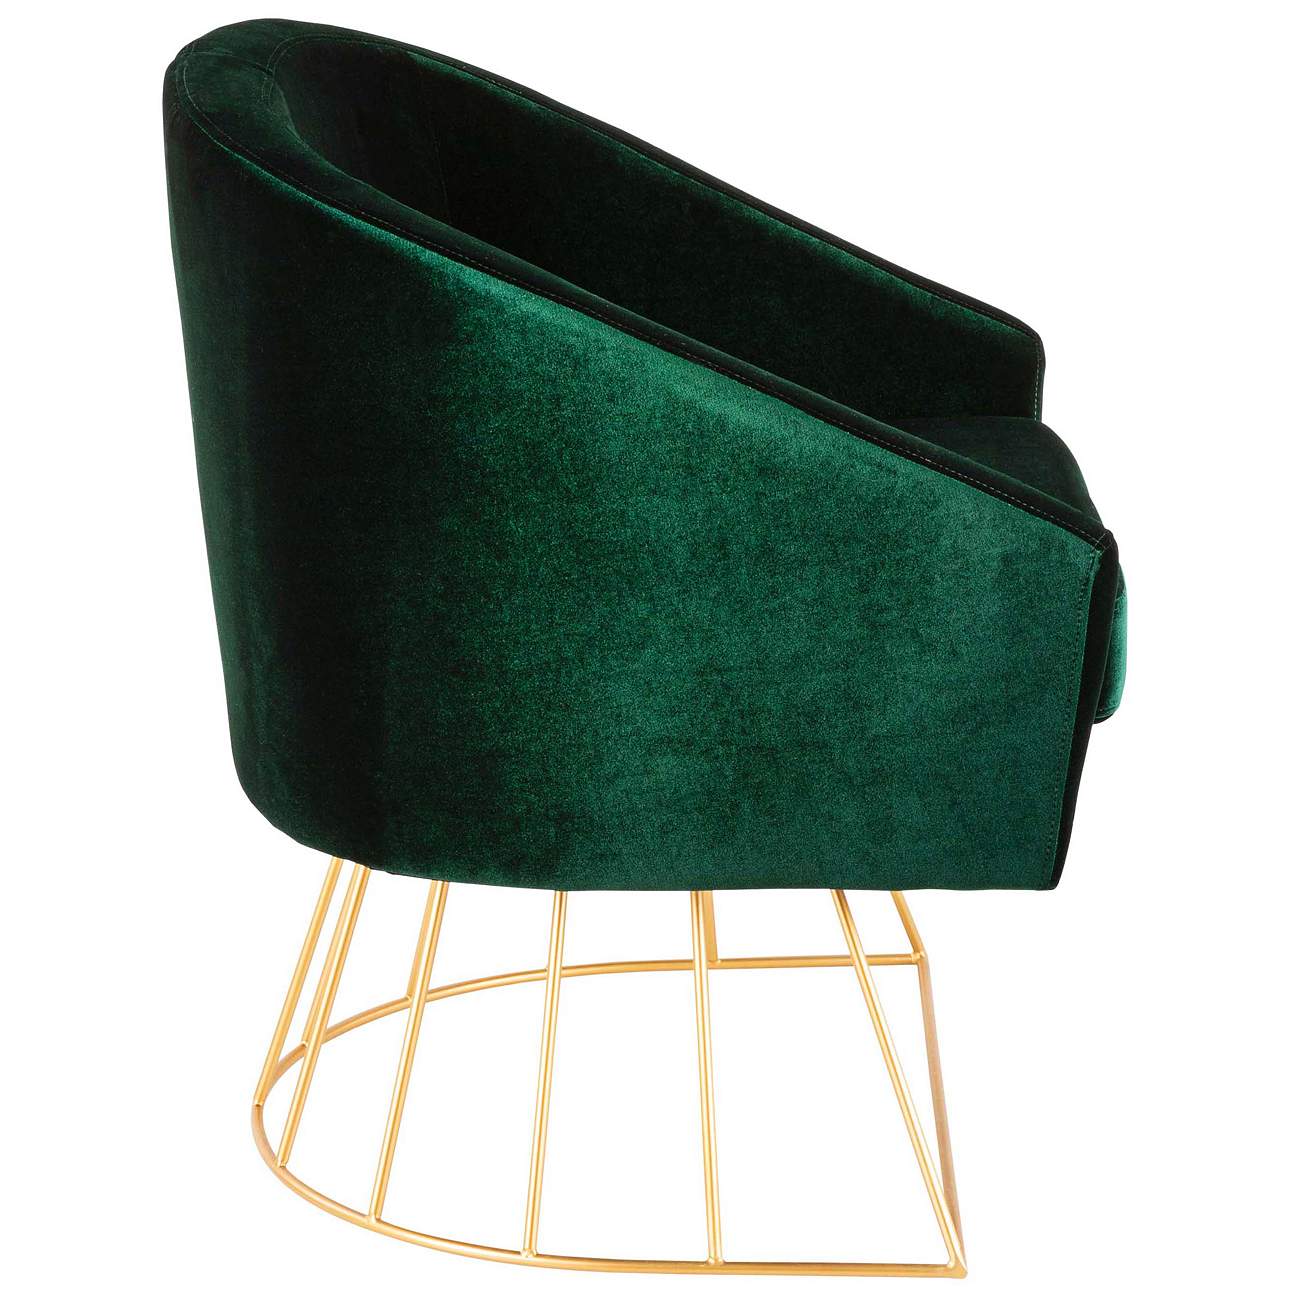 Canary Emerald Green Velvet Accent Chair - #60G29 | Lamps Plus